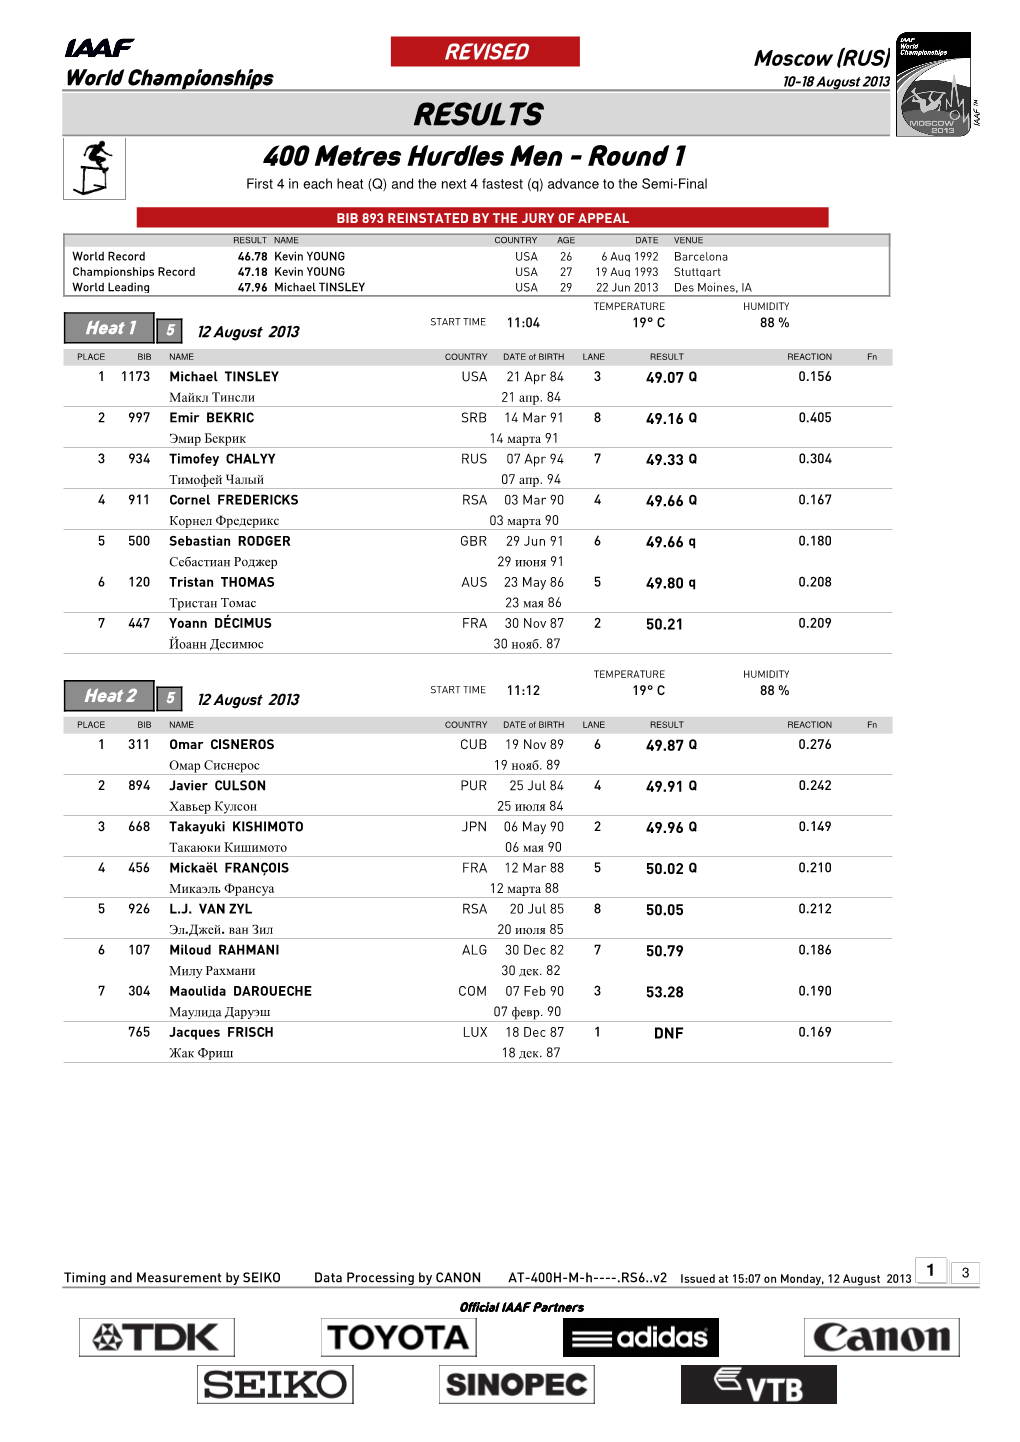 RESULTS 400 Metres Hurdles Men - Round 1 First 4 in Each Heat (Q) and the Next 4 Fastest (Q) Advance to the Semi-Final